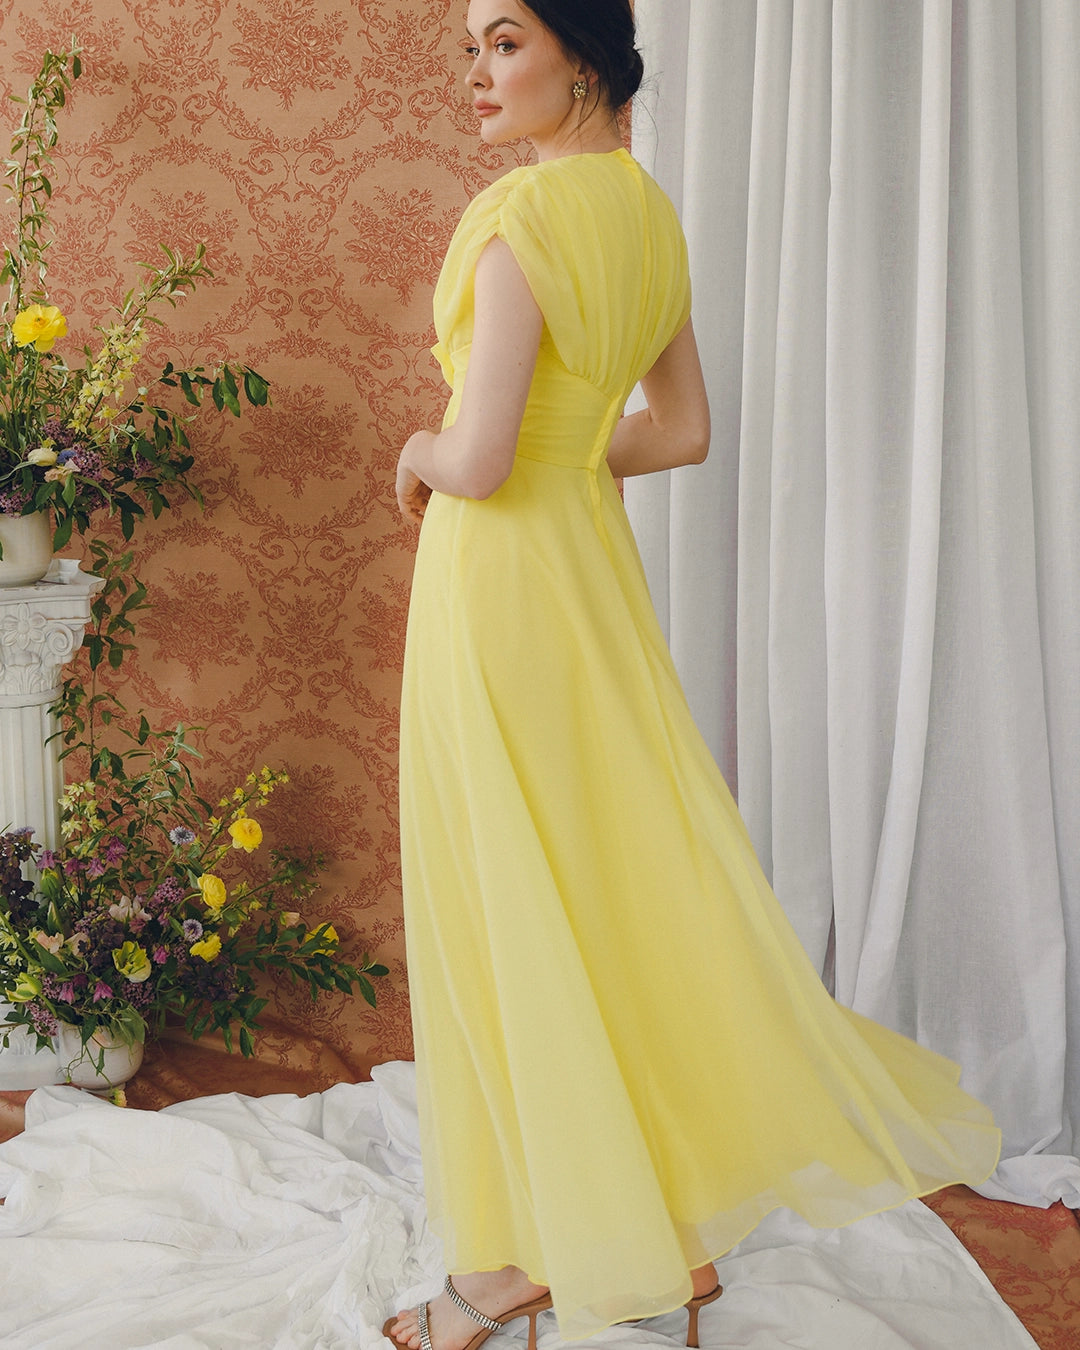 VINTAGE 1960s YELLOW TULLE ROSETTE GOWN